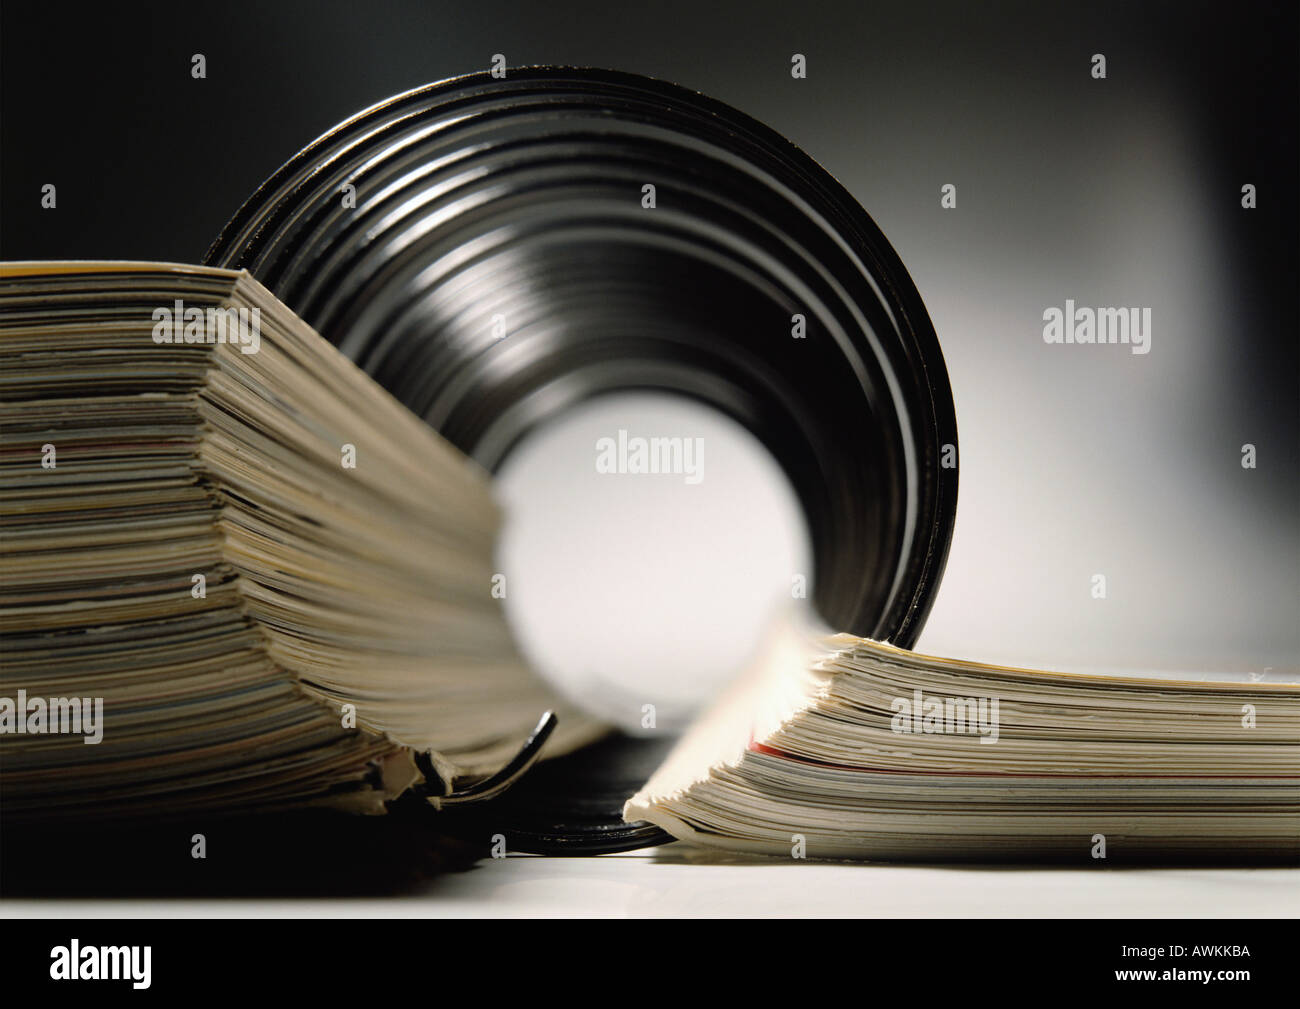 Spiral bound book, extreme close-up Stock Photo